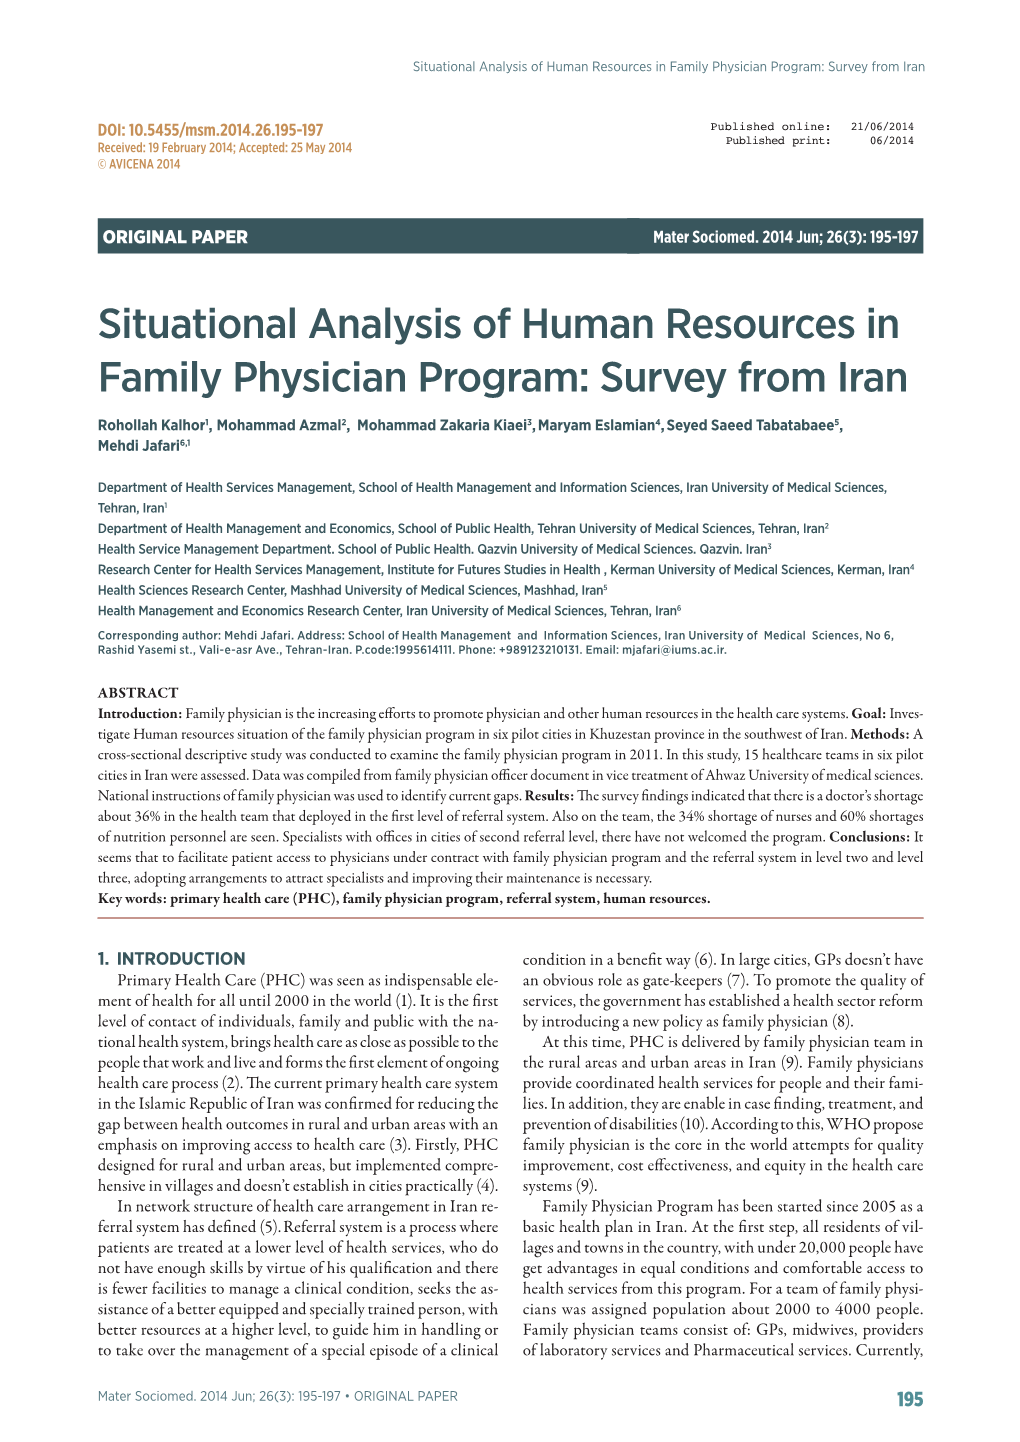 Situational Analysis of Human Resources in Family Physician Program: Survey from Iran